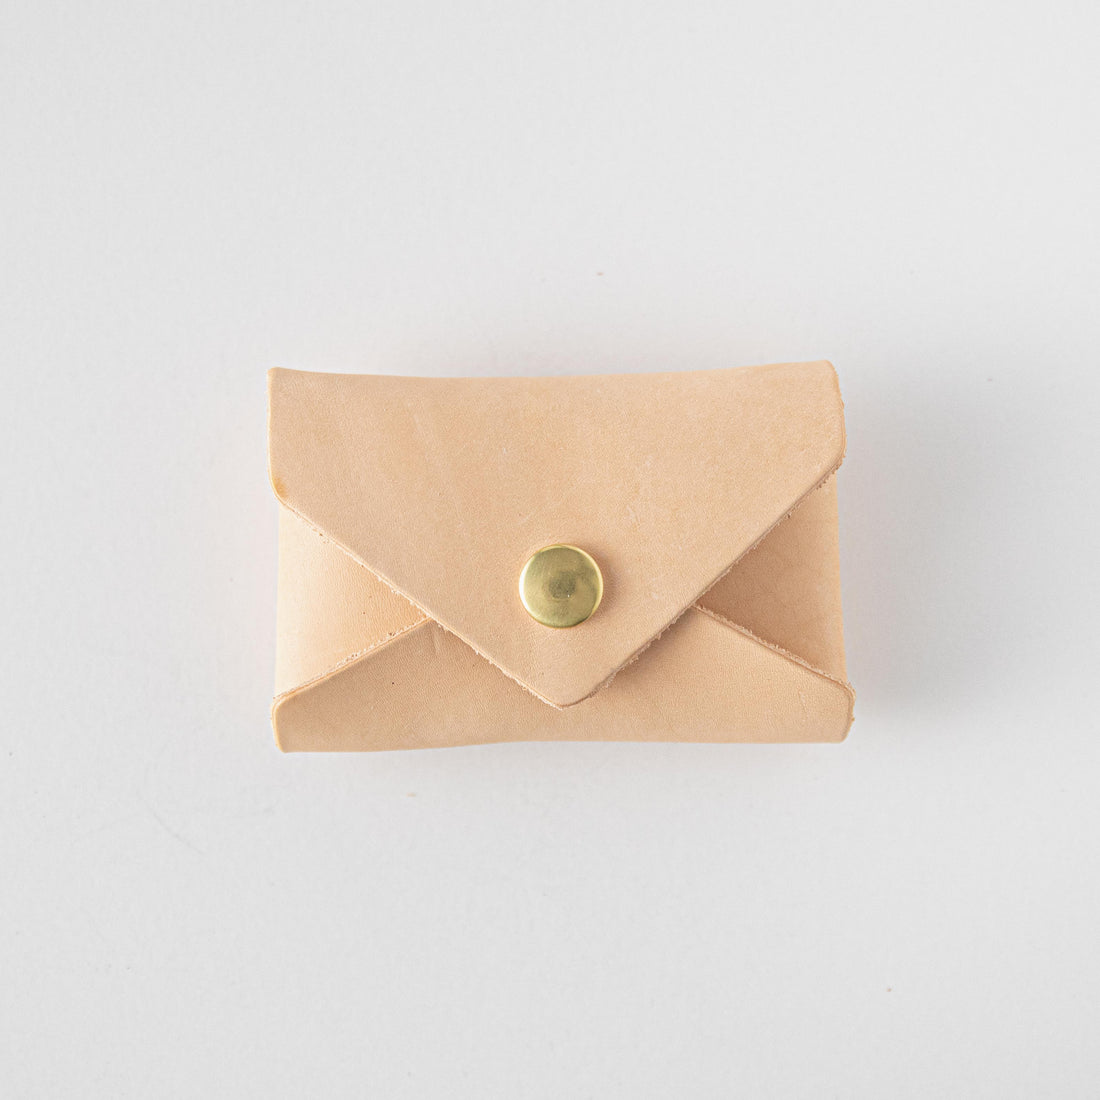 Vegetable Tanned Card Envelope- card holder wallet - leather wallet made in America at KMM &amp; Co.